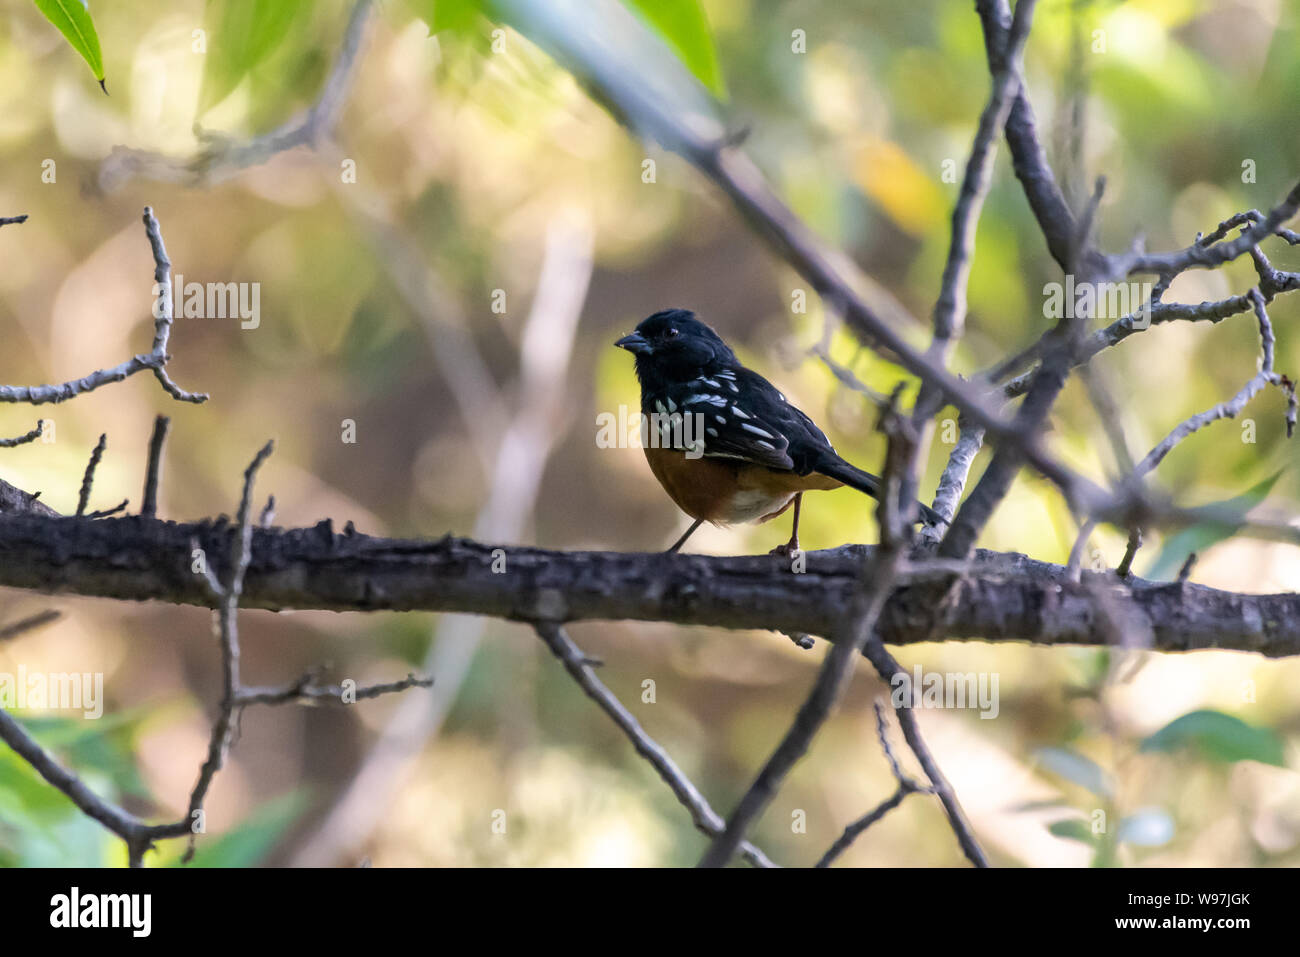 Cute Towhee bird perched on a branch in morning hours while looking for food to survive. Stock Photo